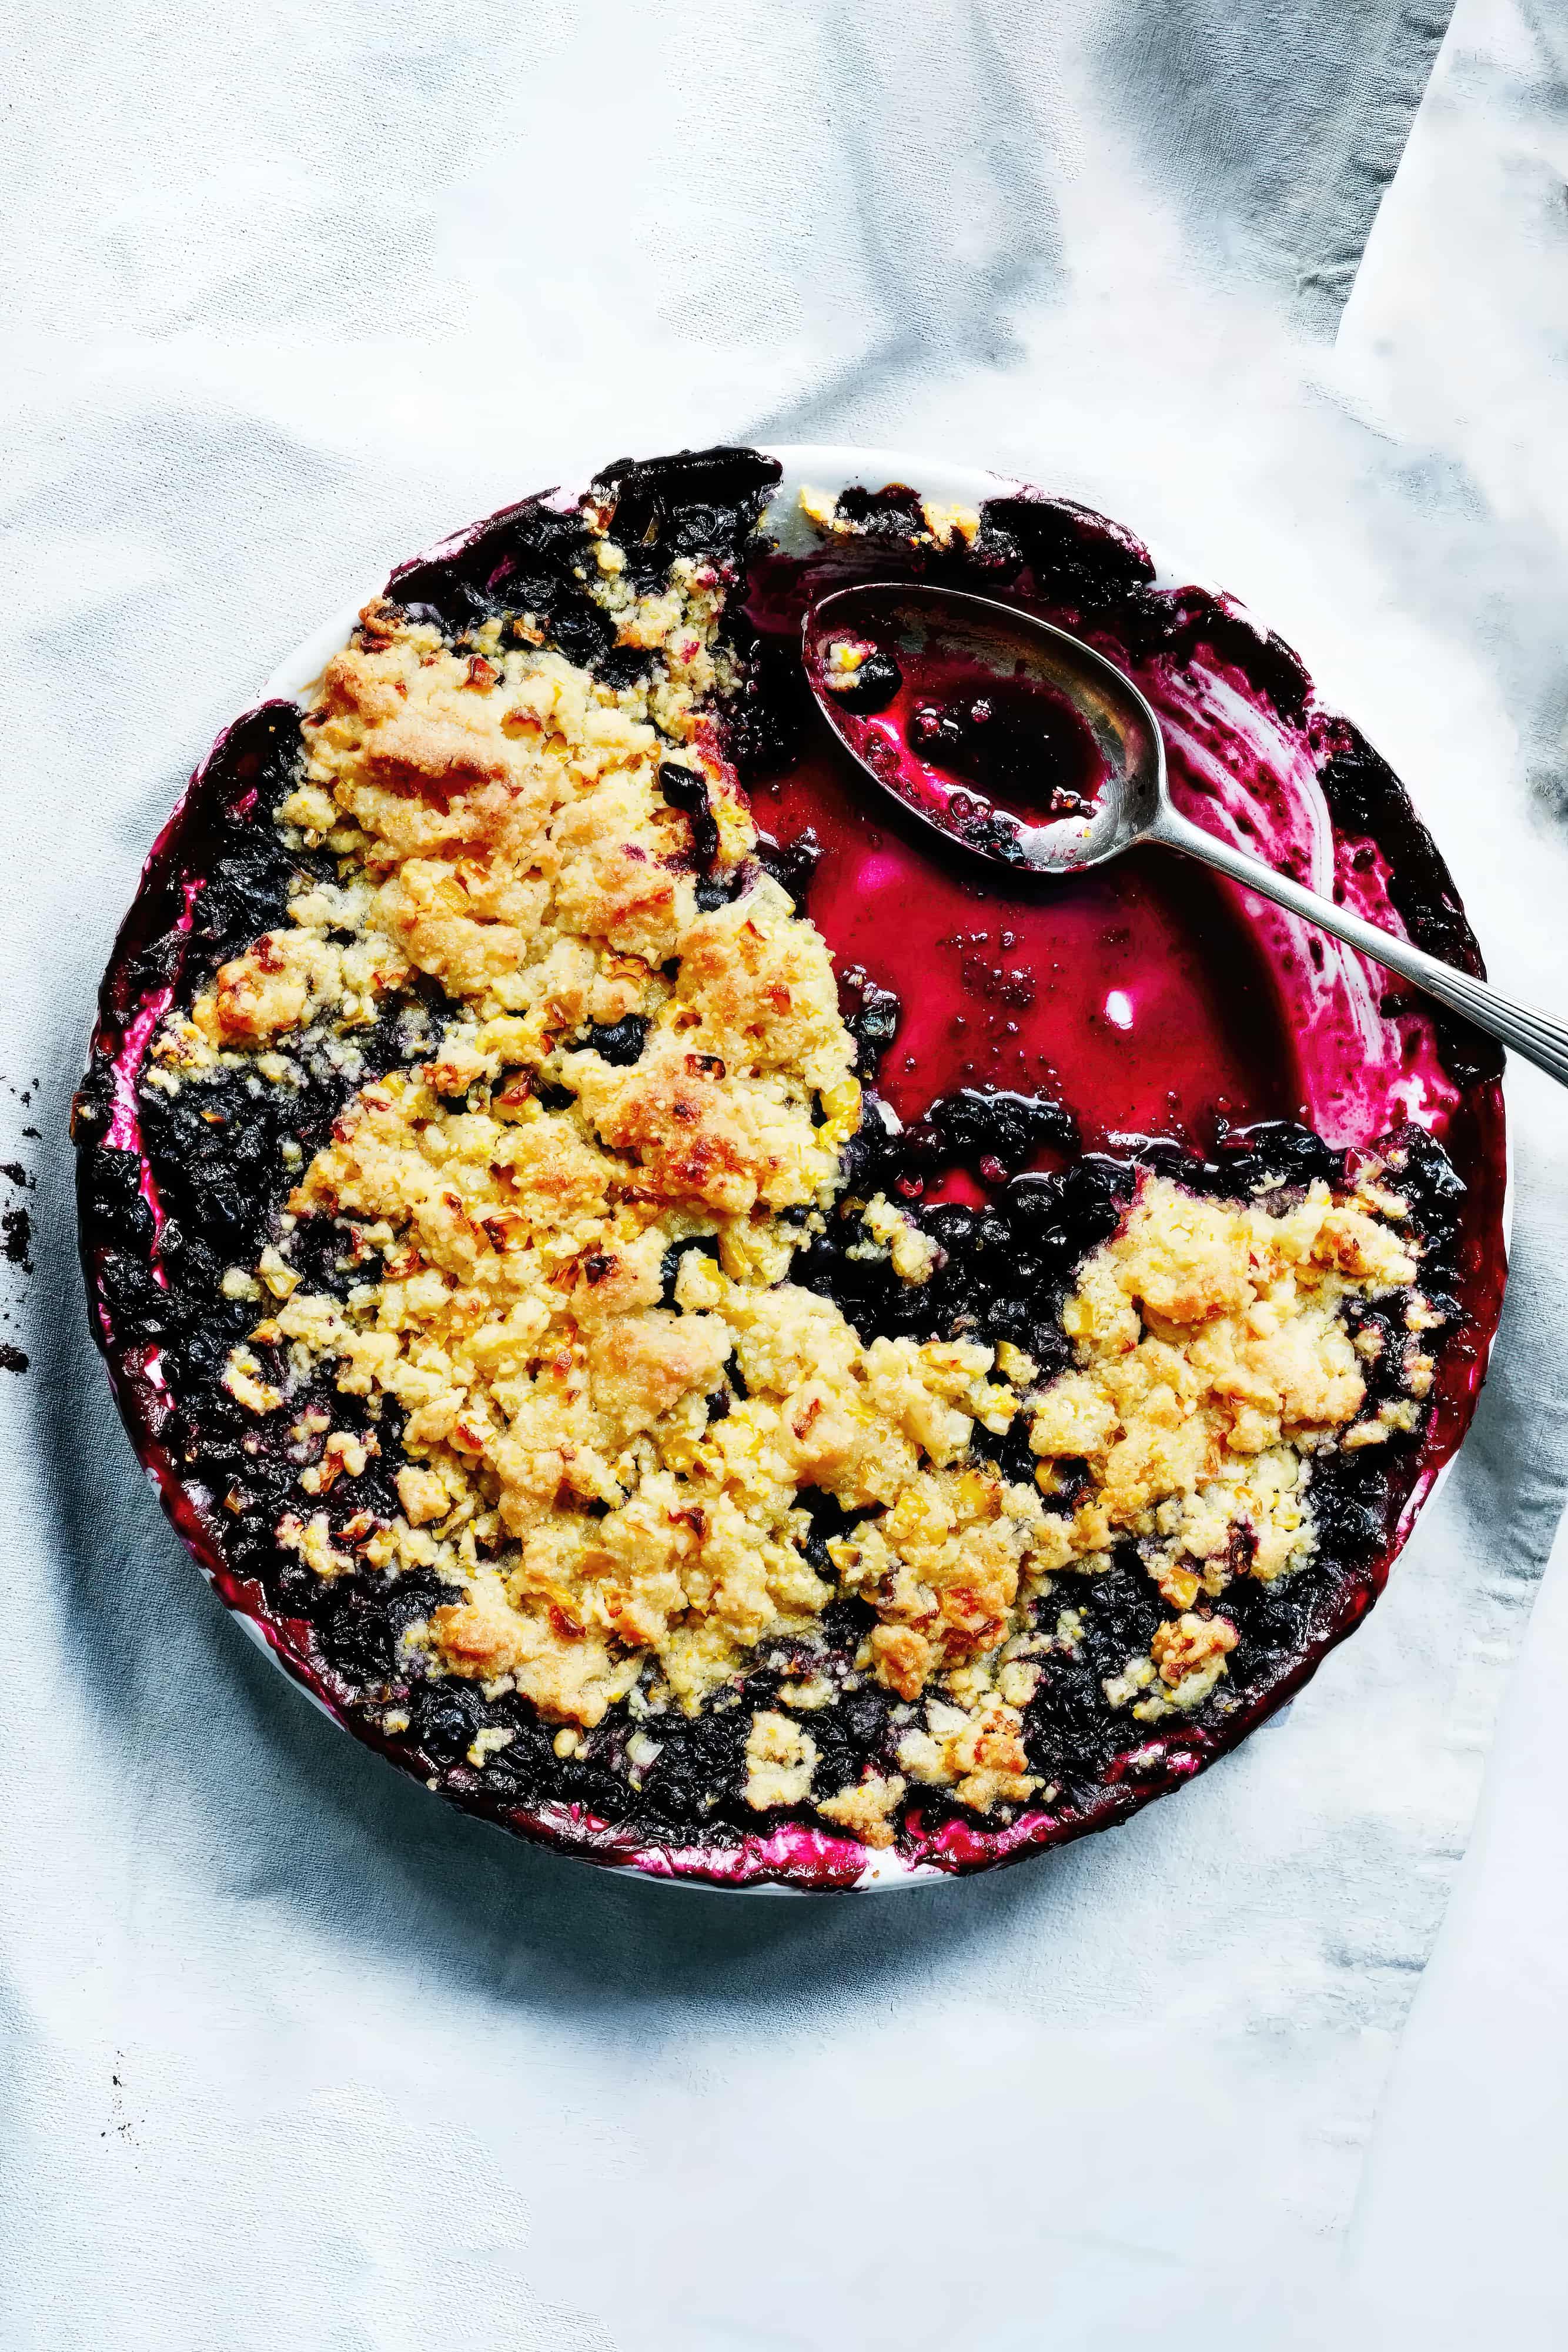 Image of blueberry and corn crisp